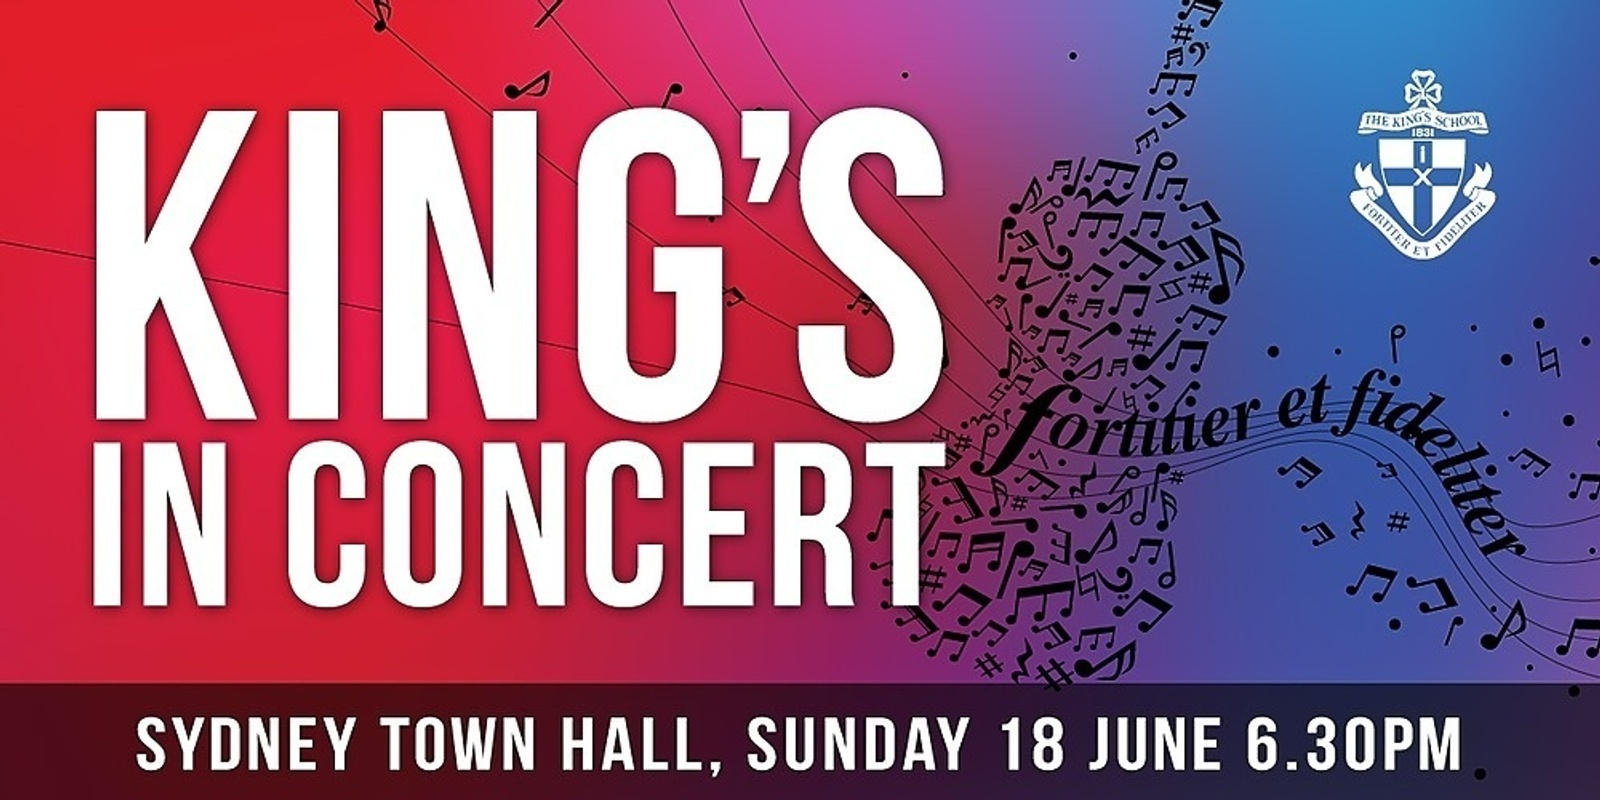 Banner image for 2023 King's in Concert